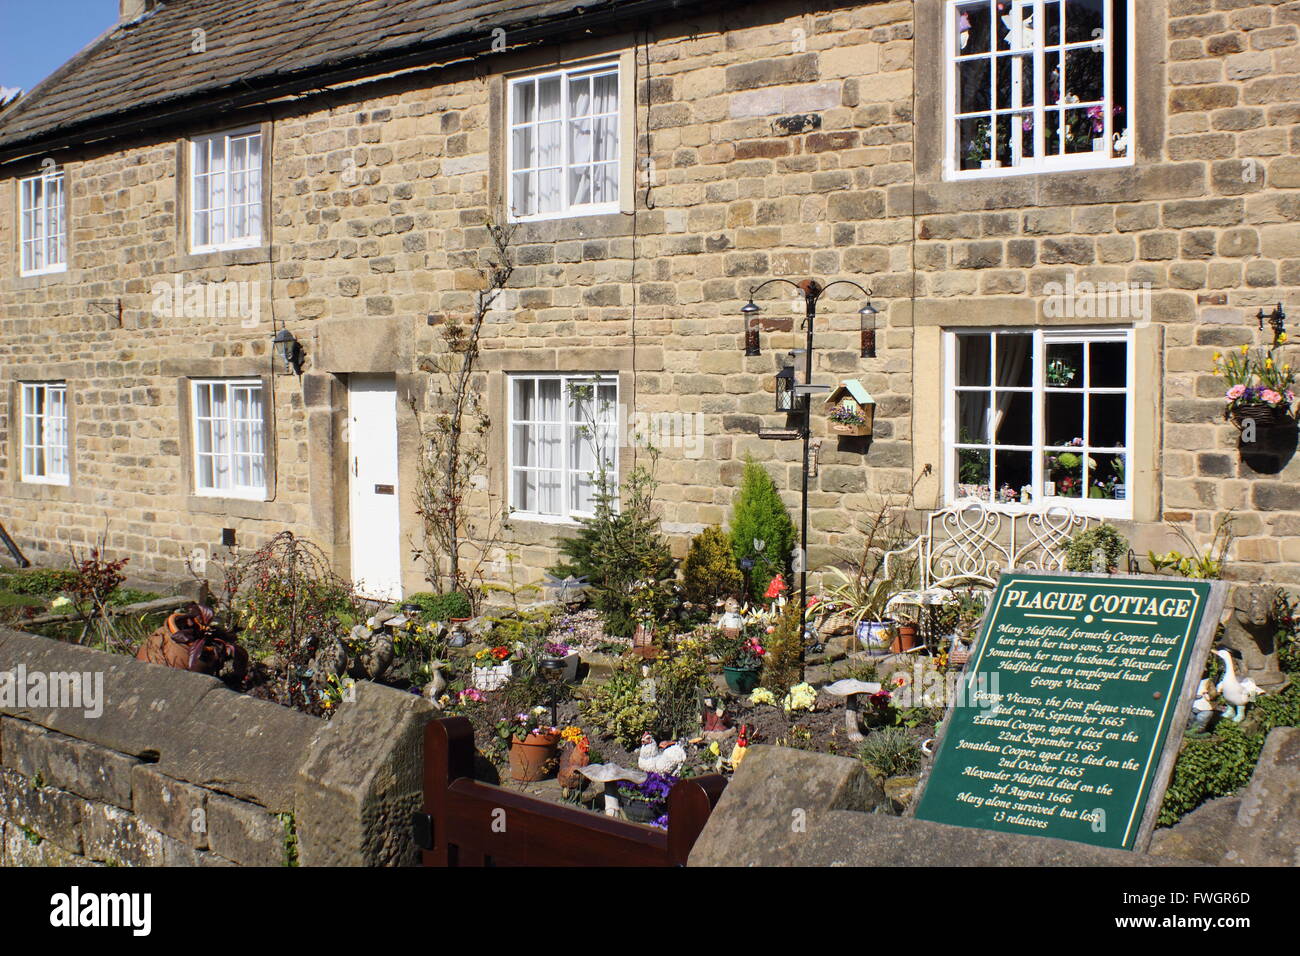 Cottages in Eyam, Peak District famed for their association with the village's 17th century plague outbreak  Derbyshire UK Stock Photo